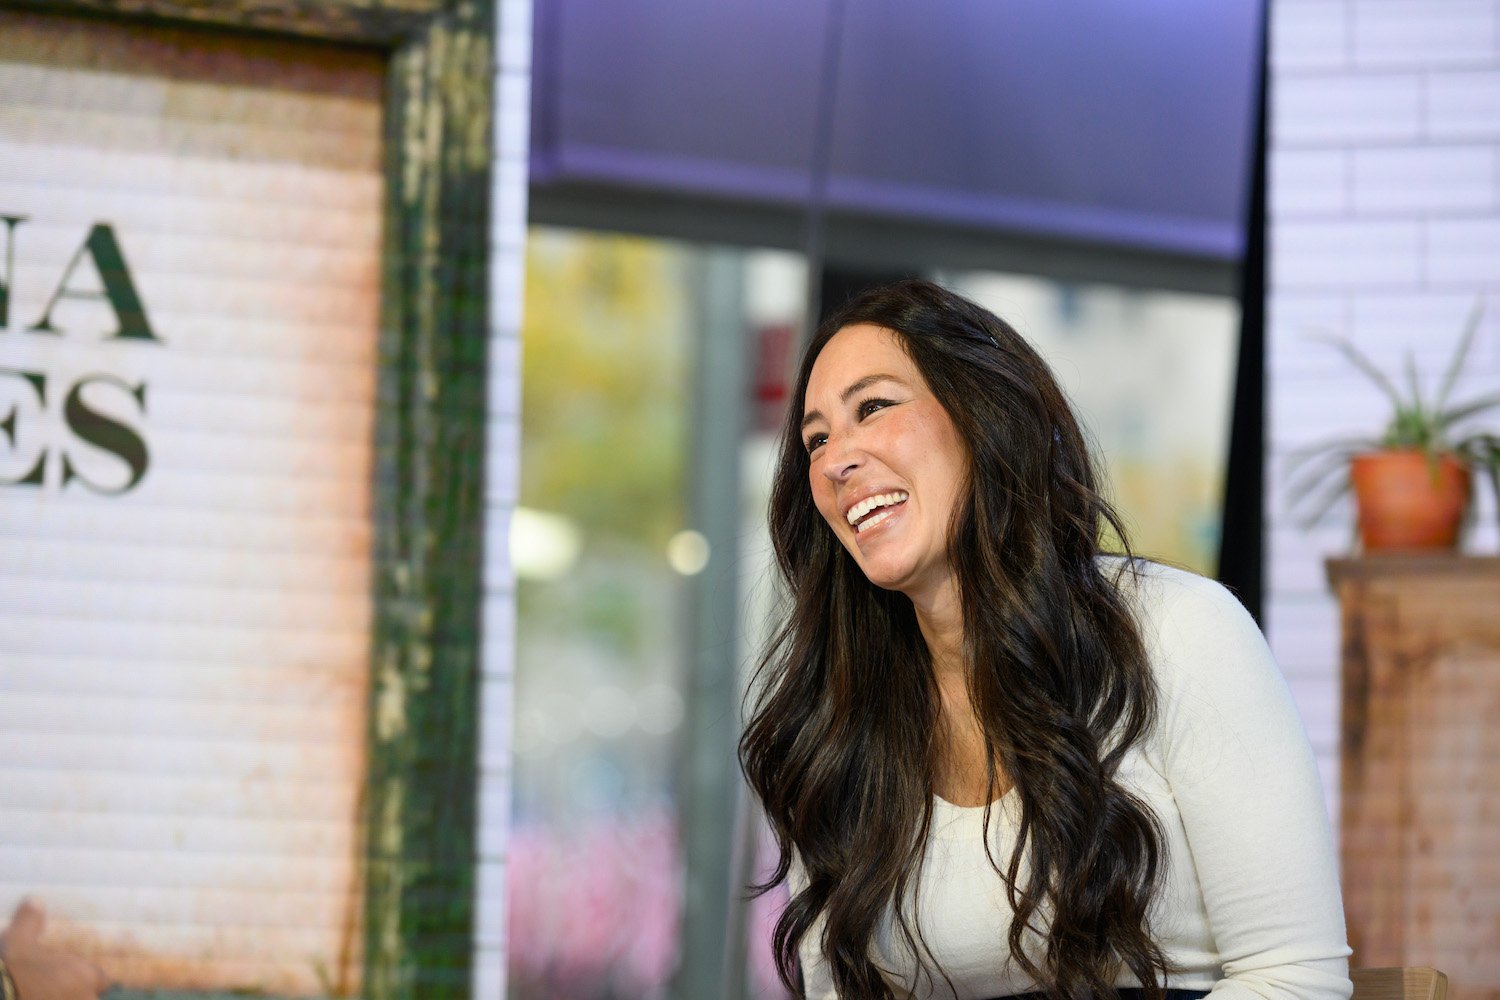 'Fixer Upper' star Joanna Gaines laughing on the 'Today' show